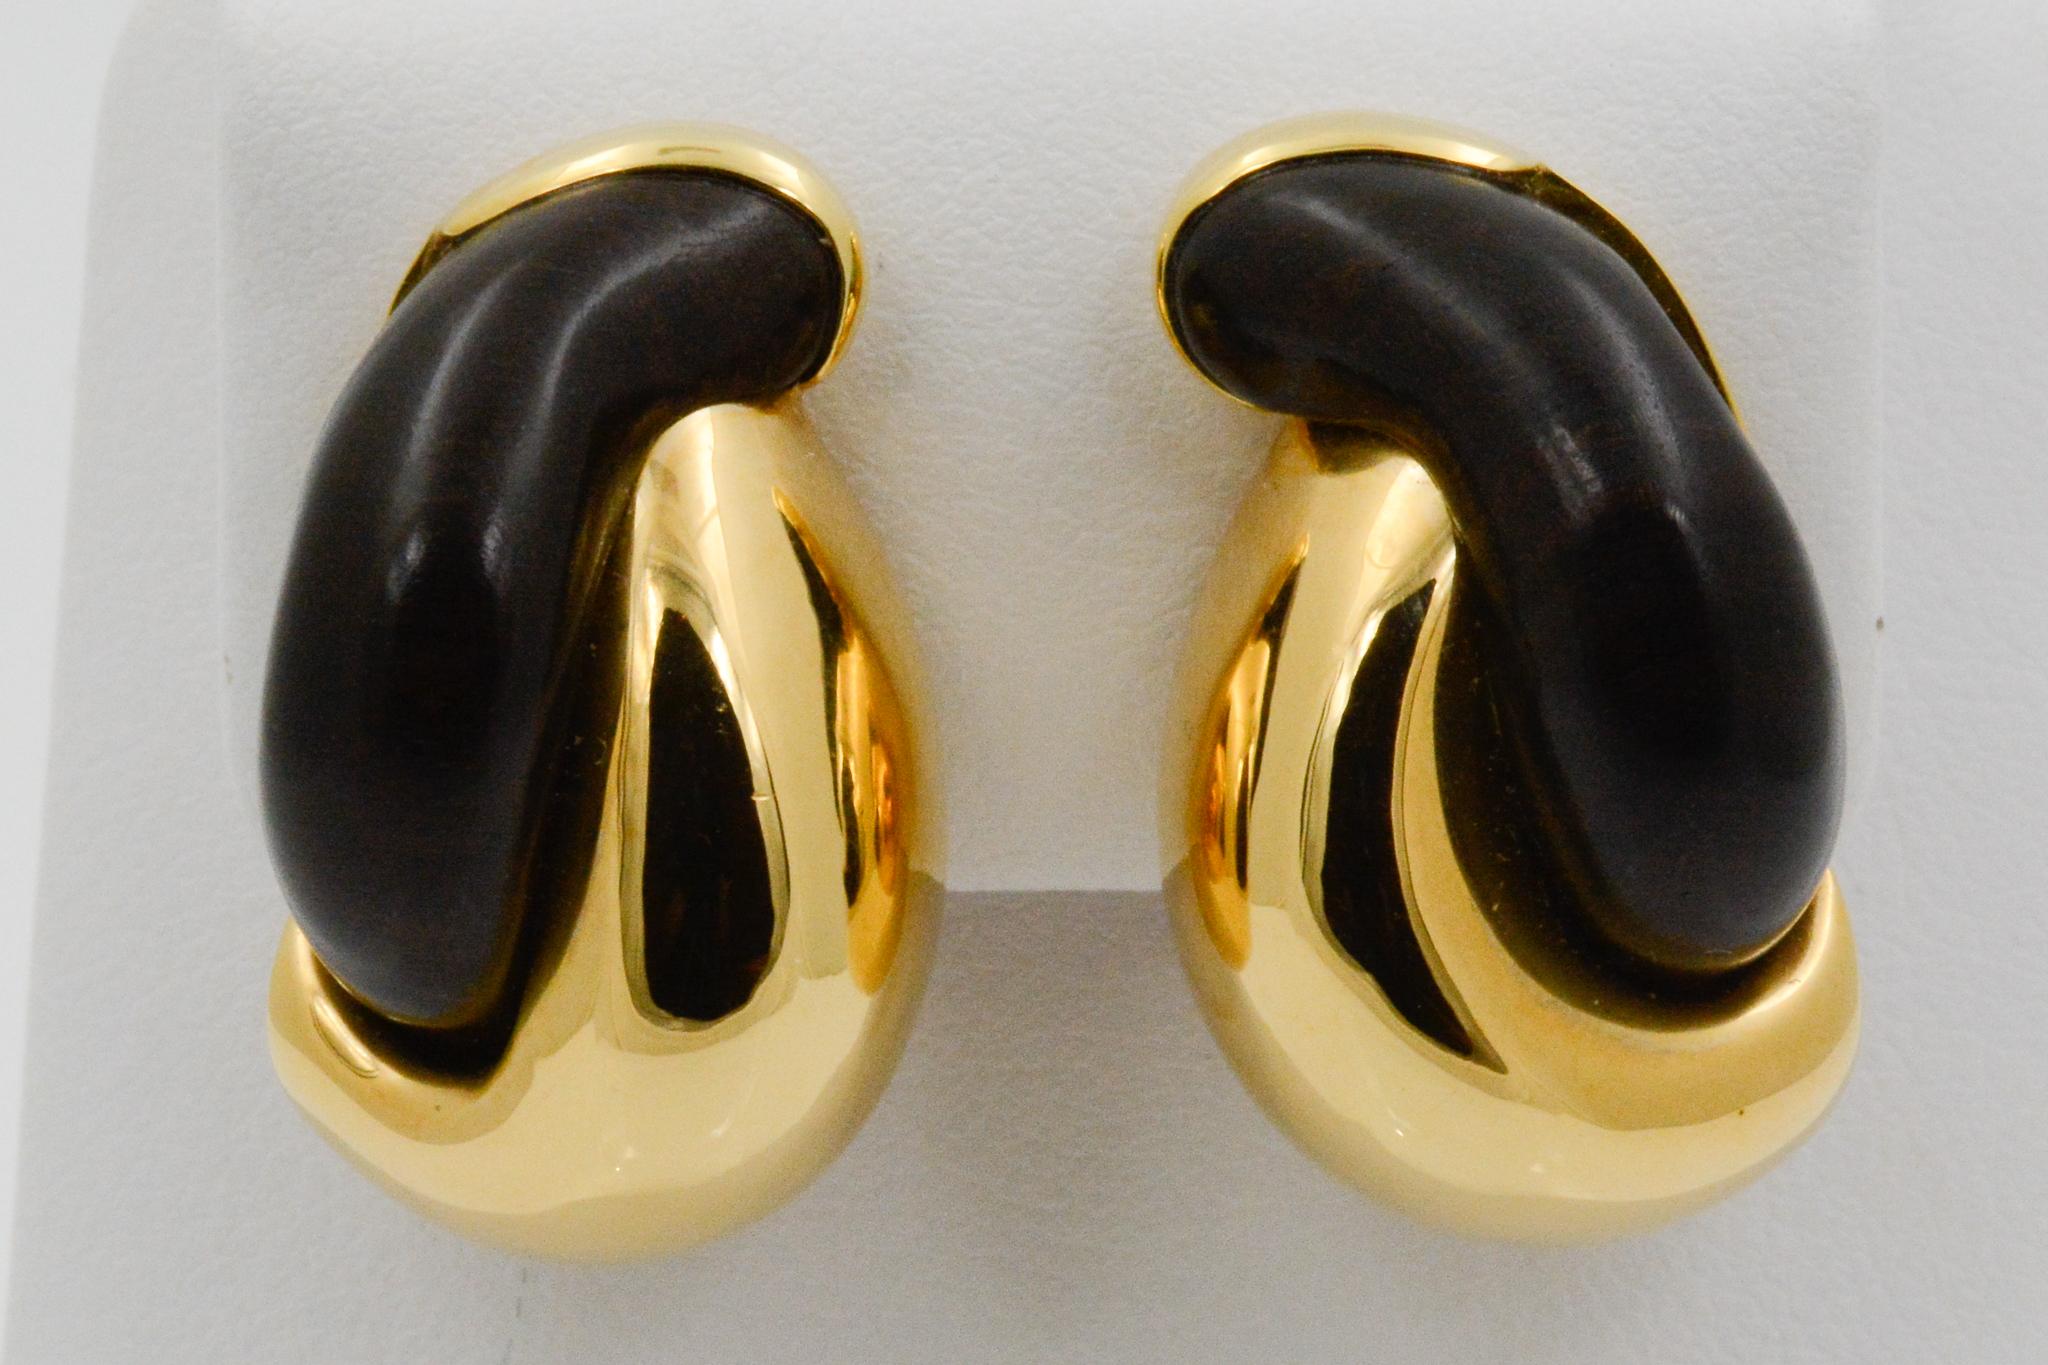 From Seaman Schepps, these half link clip earrings feature intertwining 18 karat yellow gold and ebony wood. Signed Seaman Schepps. 